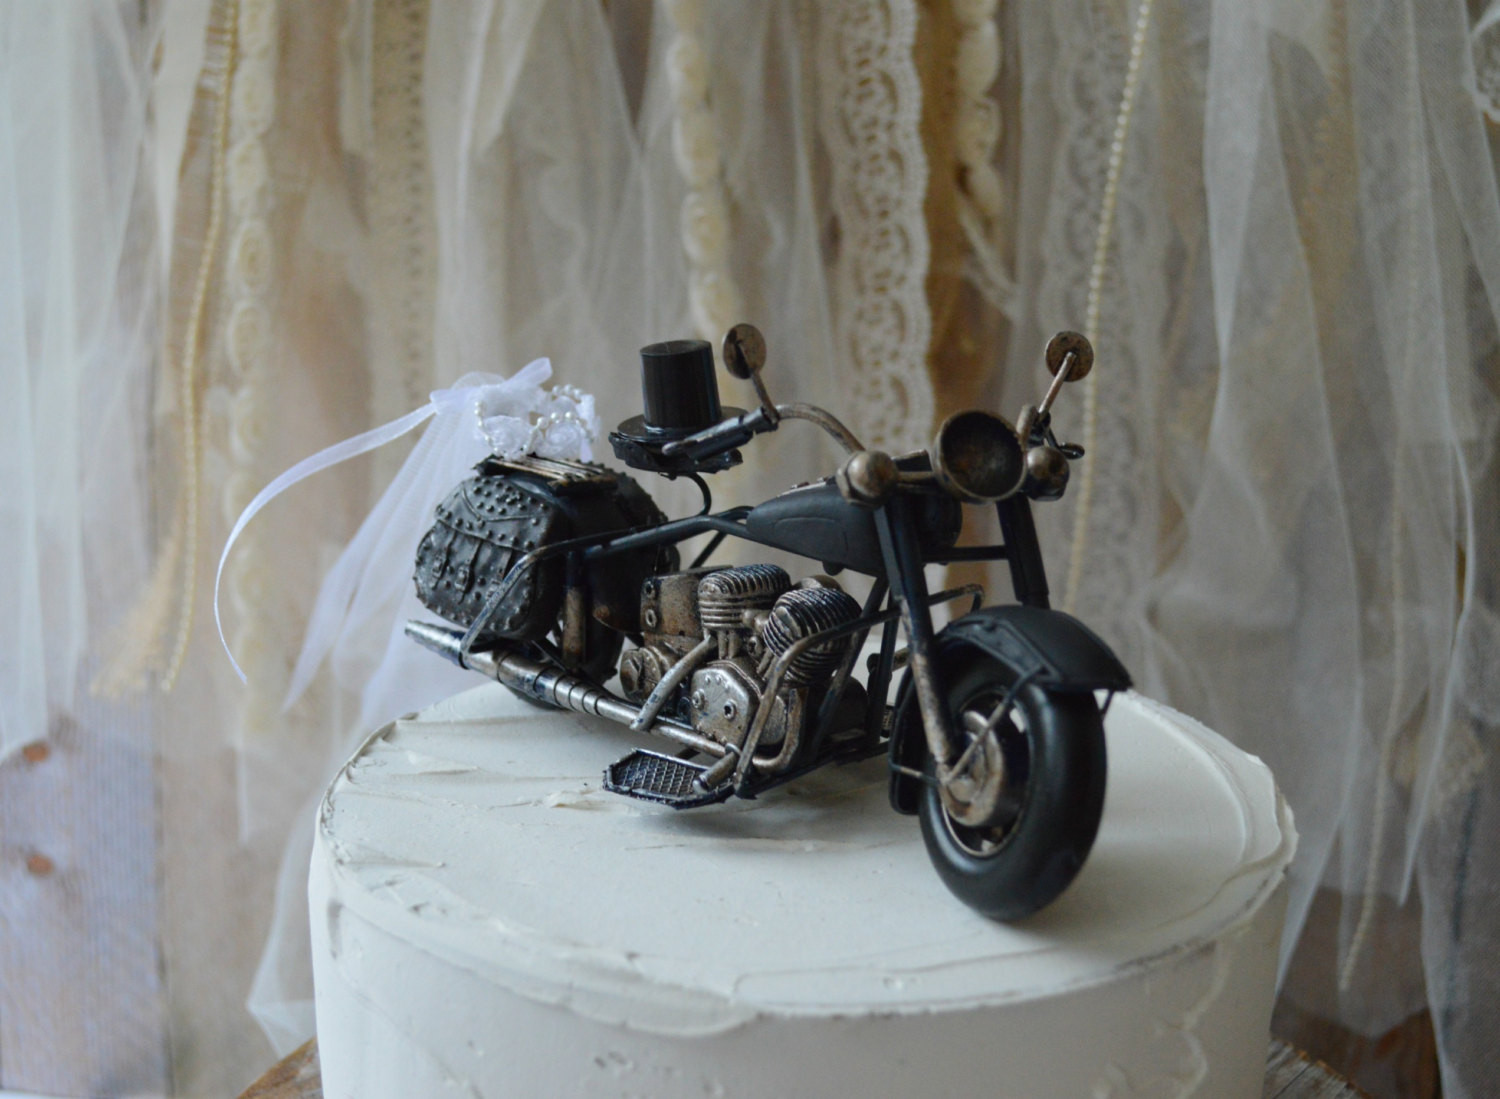 Motorcycle Cake Toppers For Wedding Cakes
 Motorcycle wedding cake topper motorcycle topper Harley